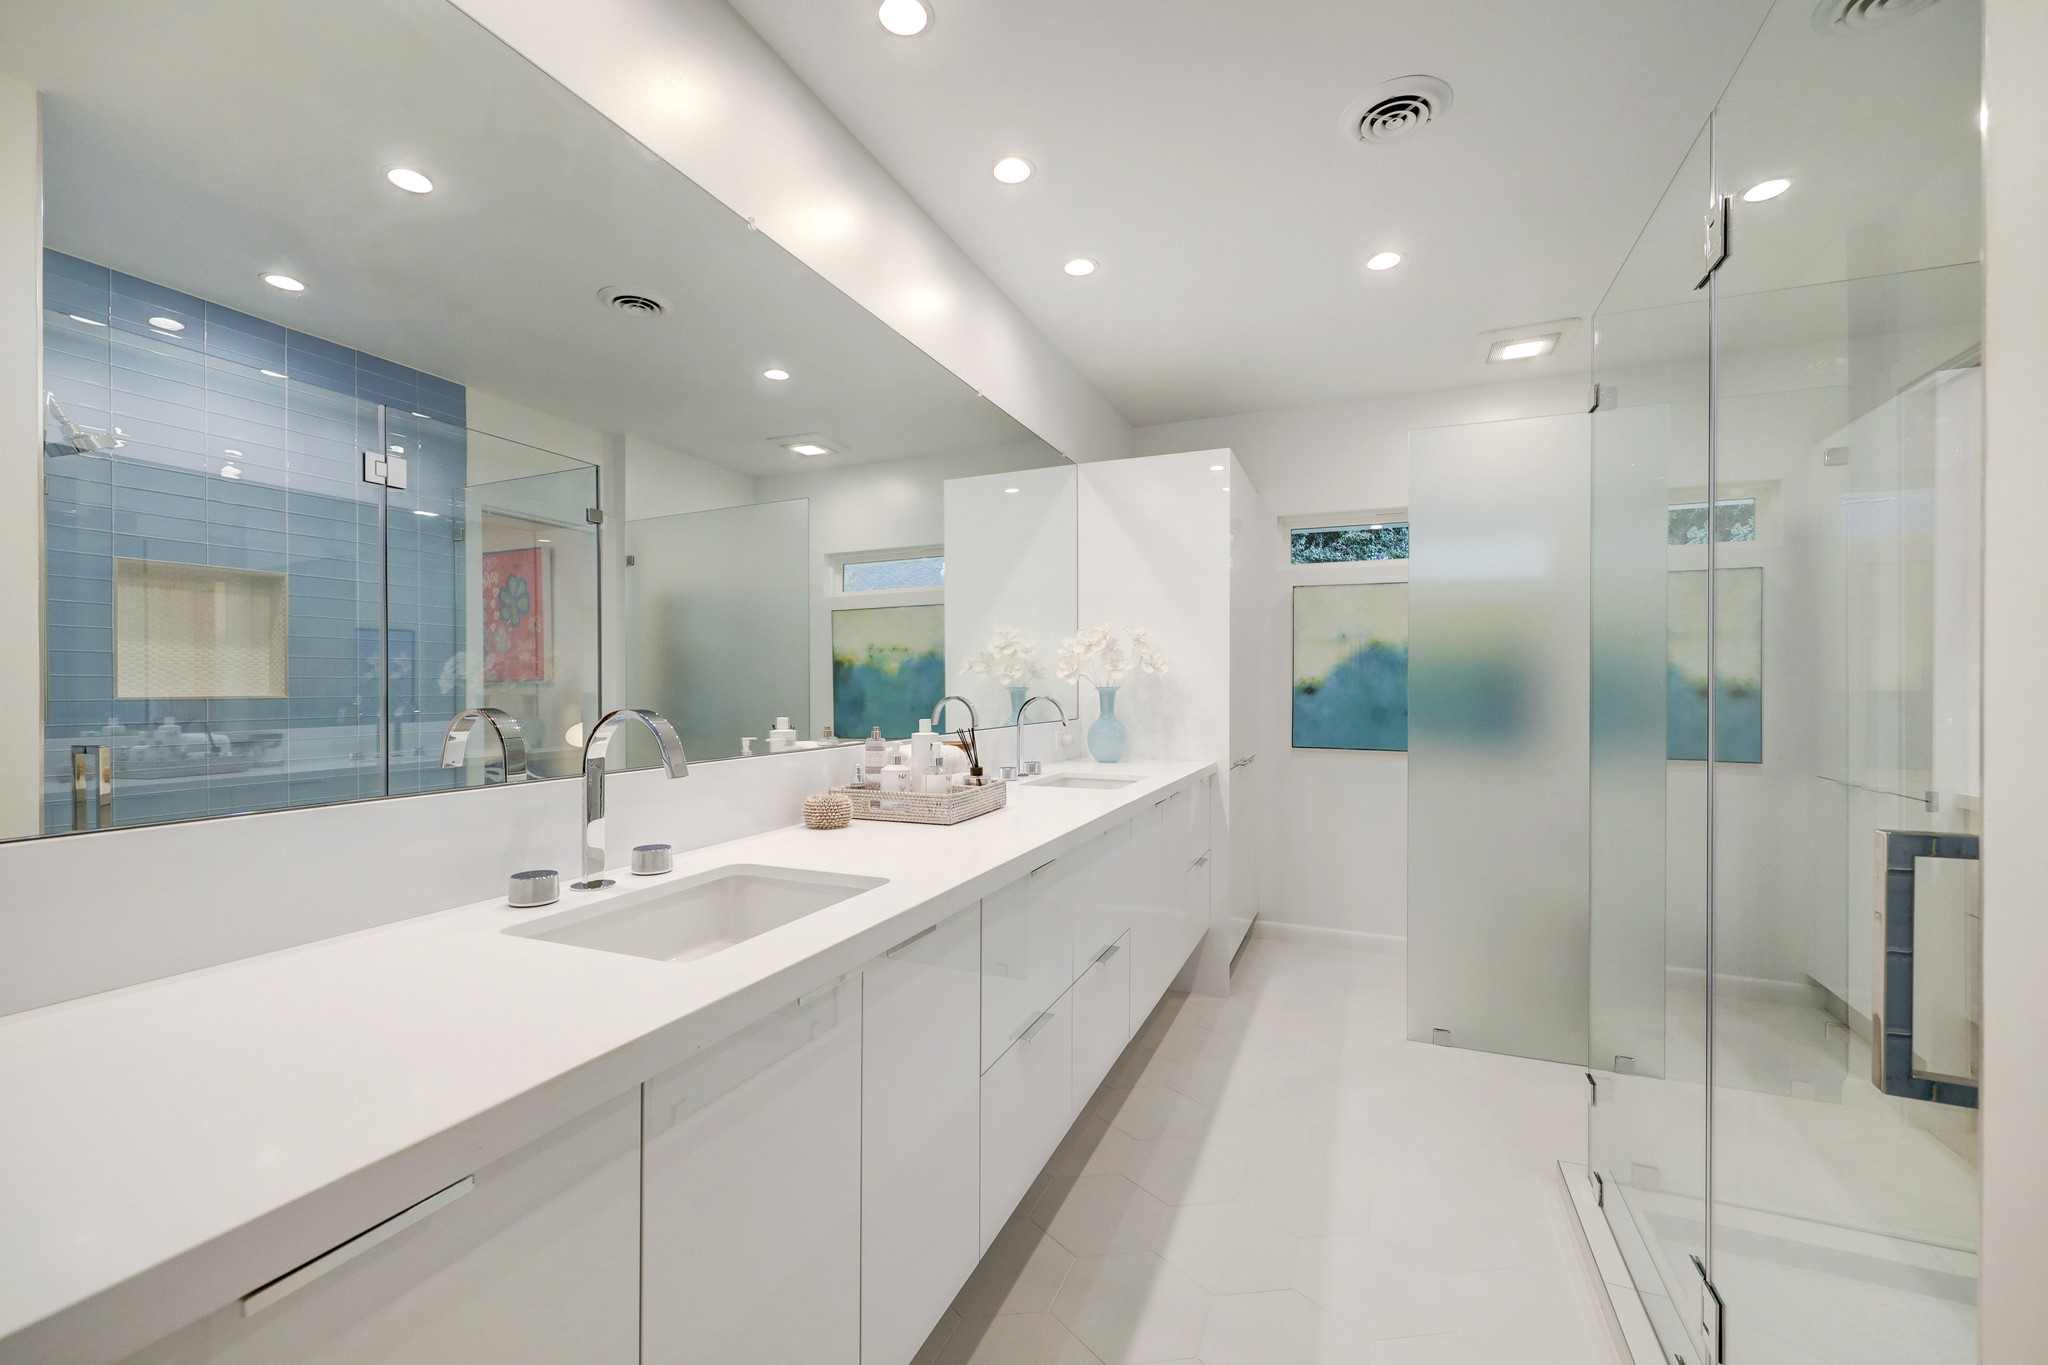 En-suite secondary bath features double sinks and walk-in shower with colorful accents.